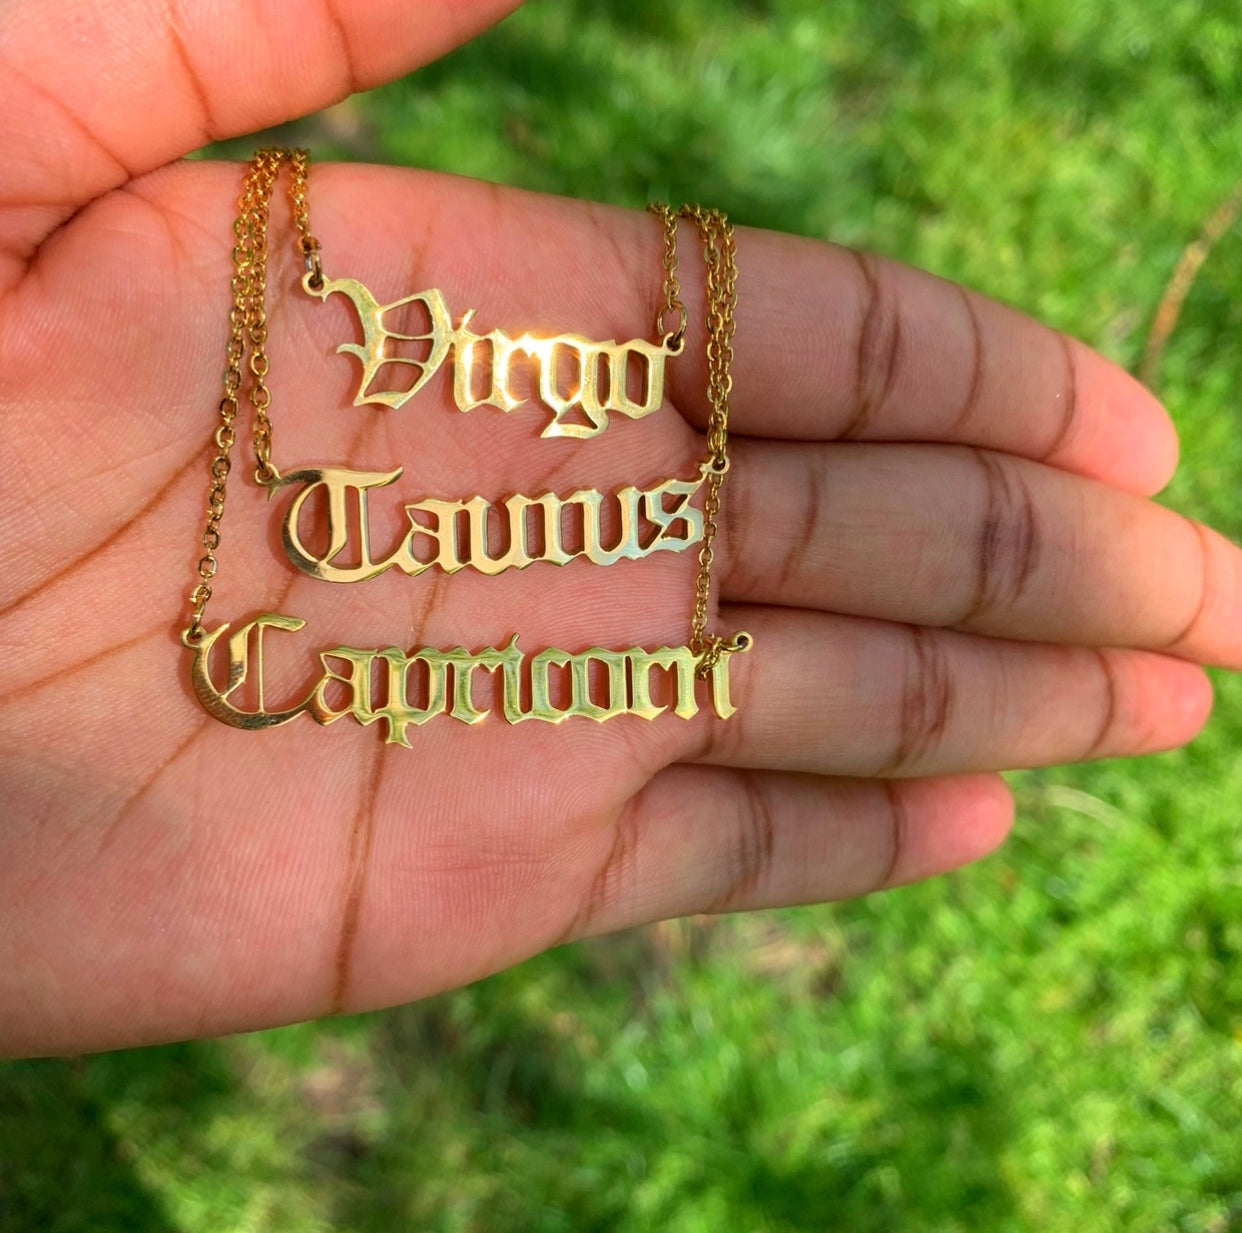 Rep Your Sign Necklace